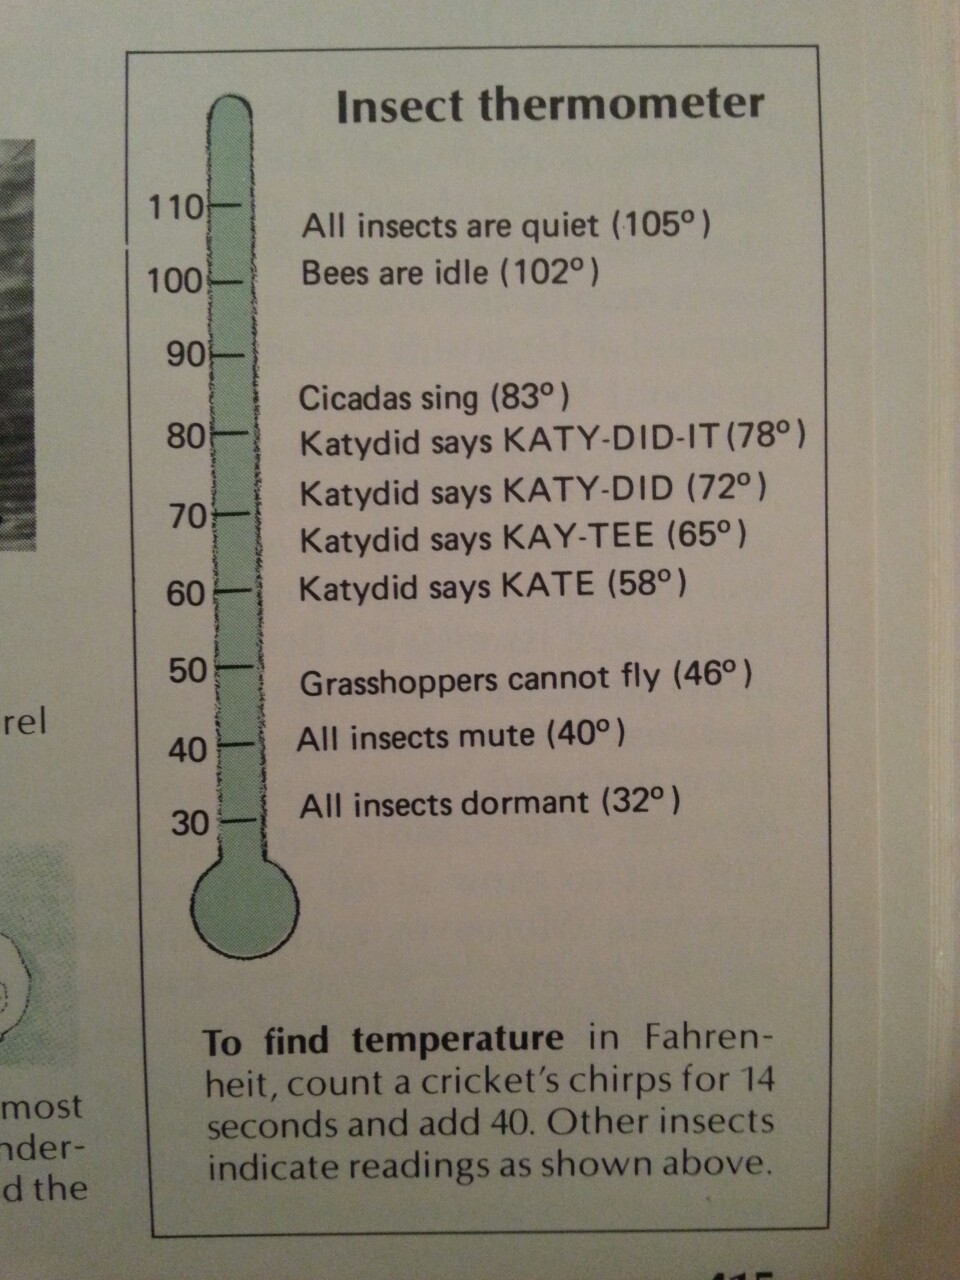 To find the temperature in Fahrenheit, count the crickets for 14 seconds, then add 40.